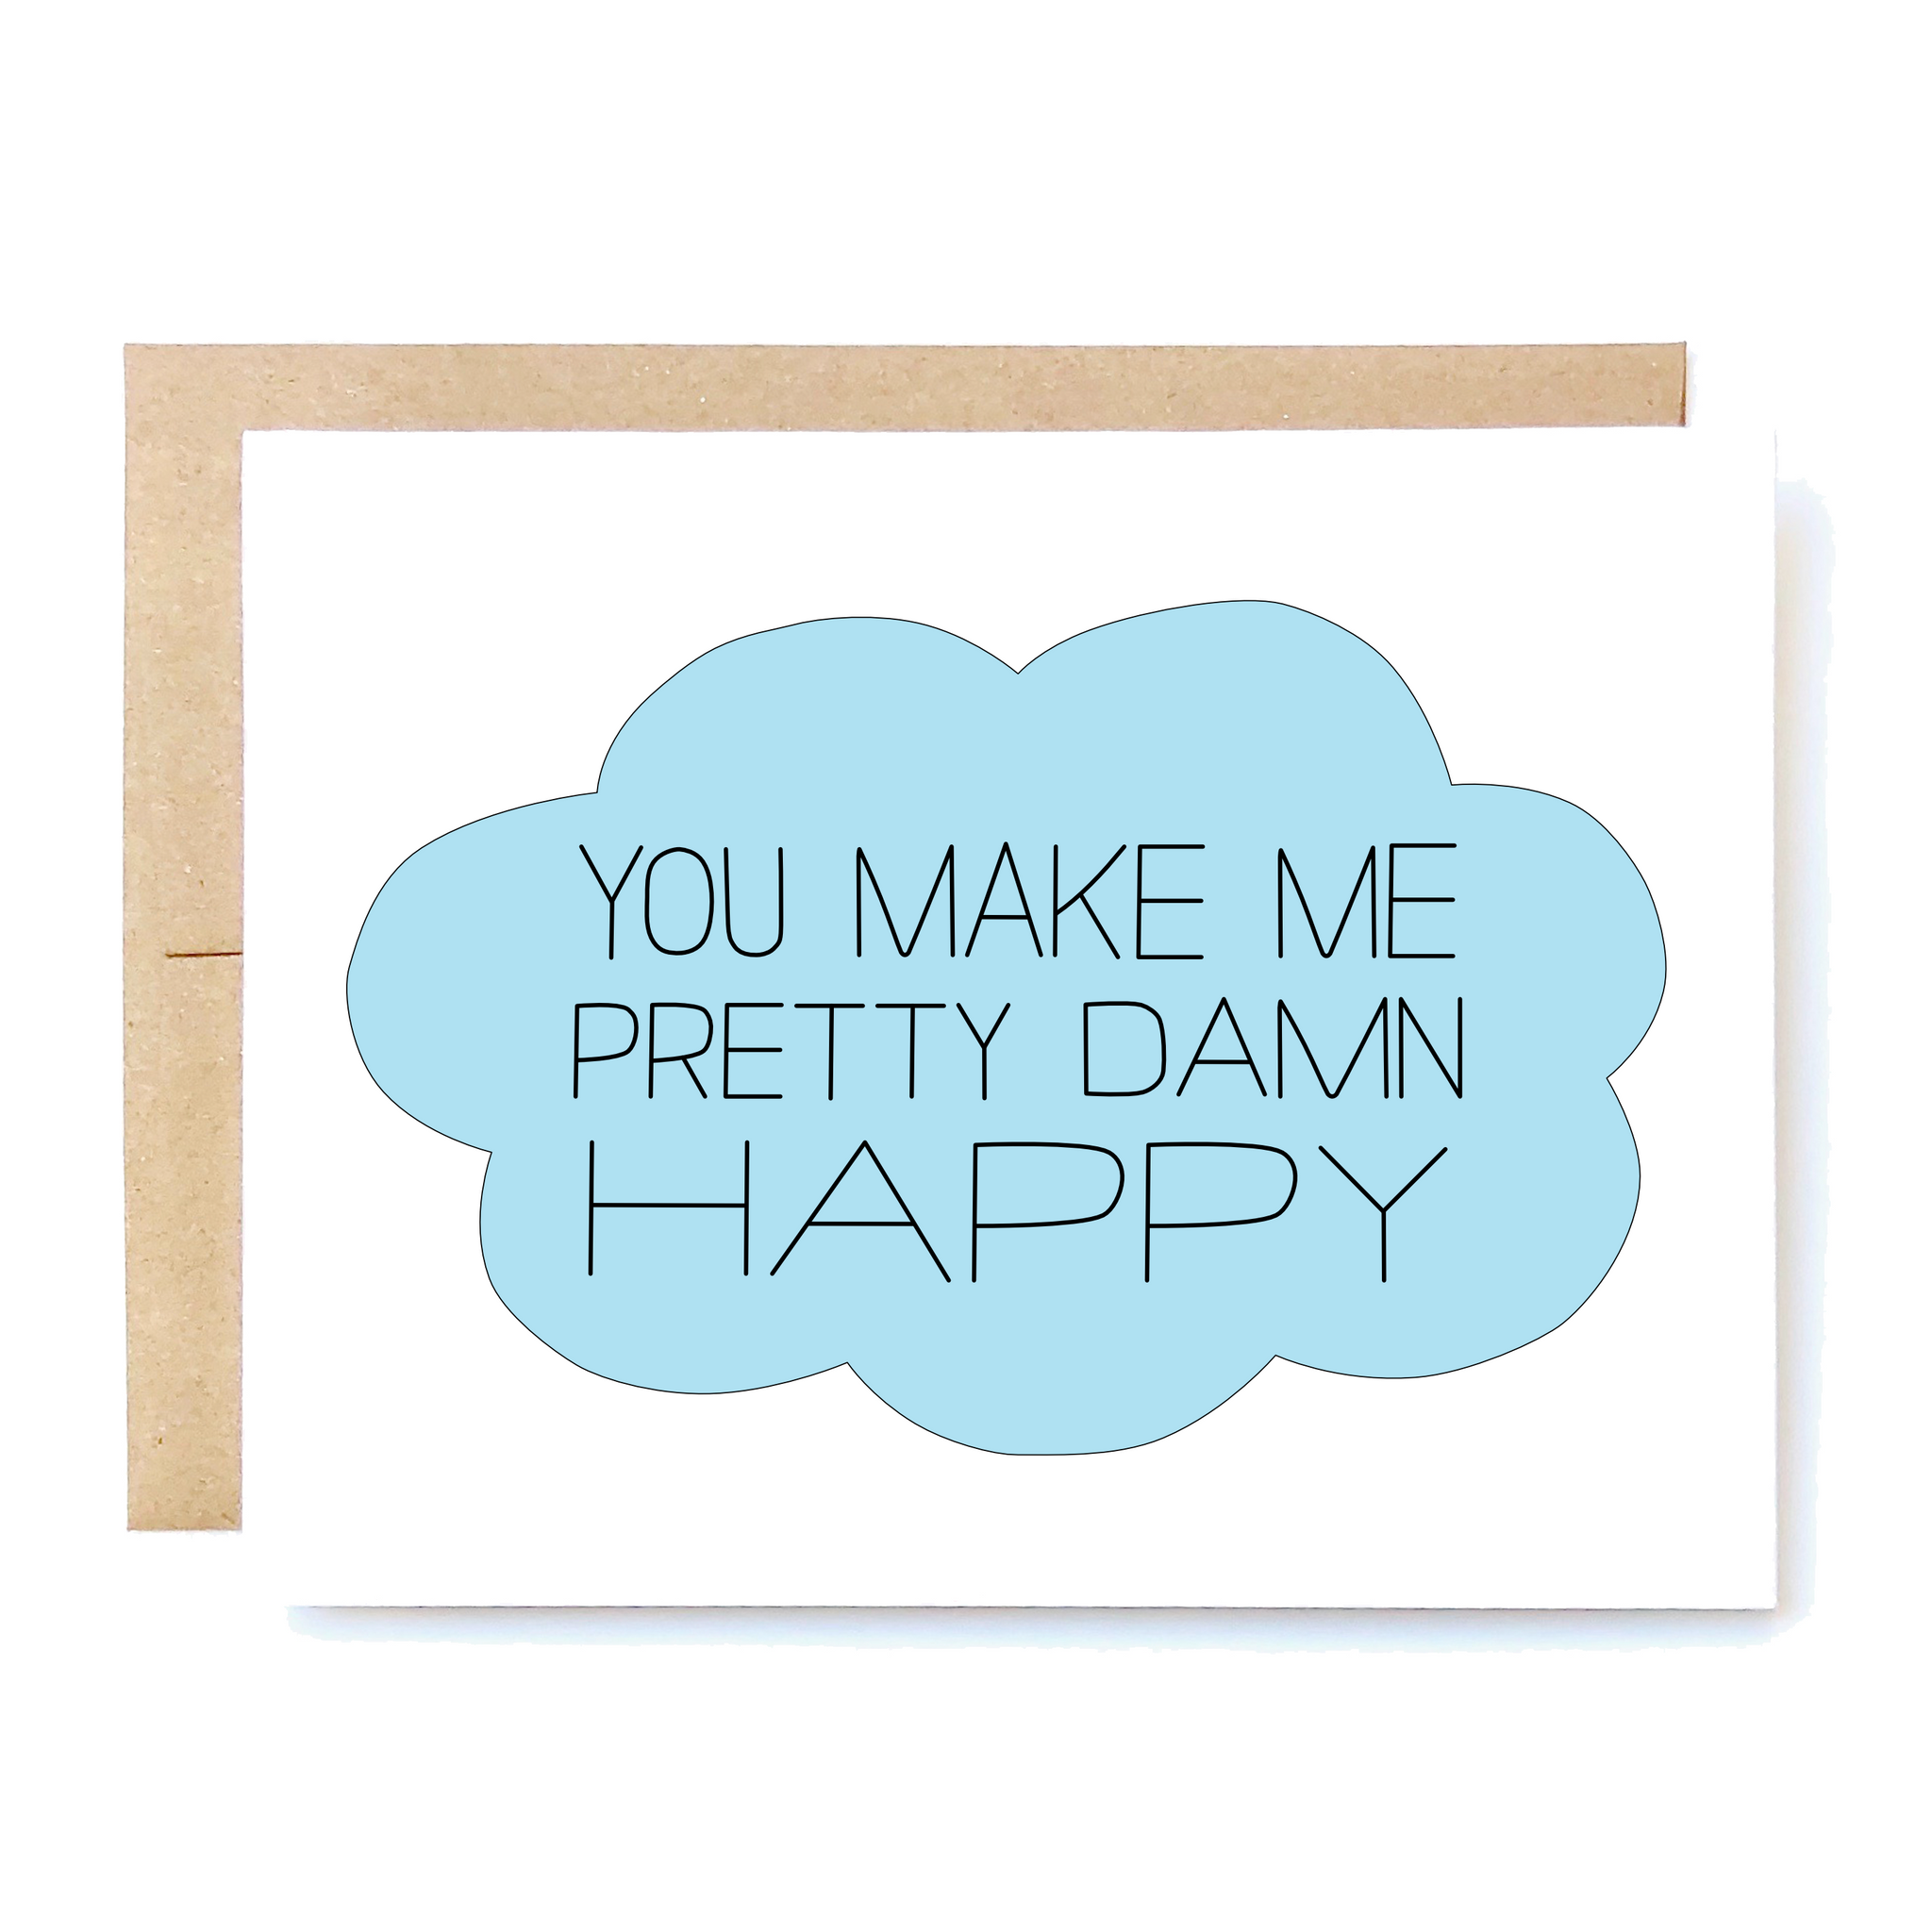 Card Front: You make me pretty damn happy.